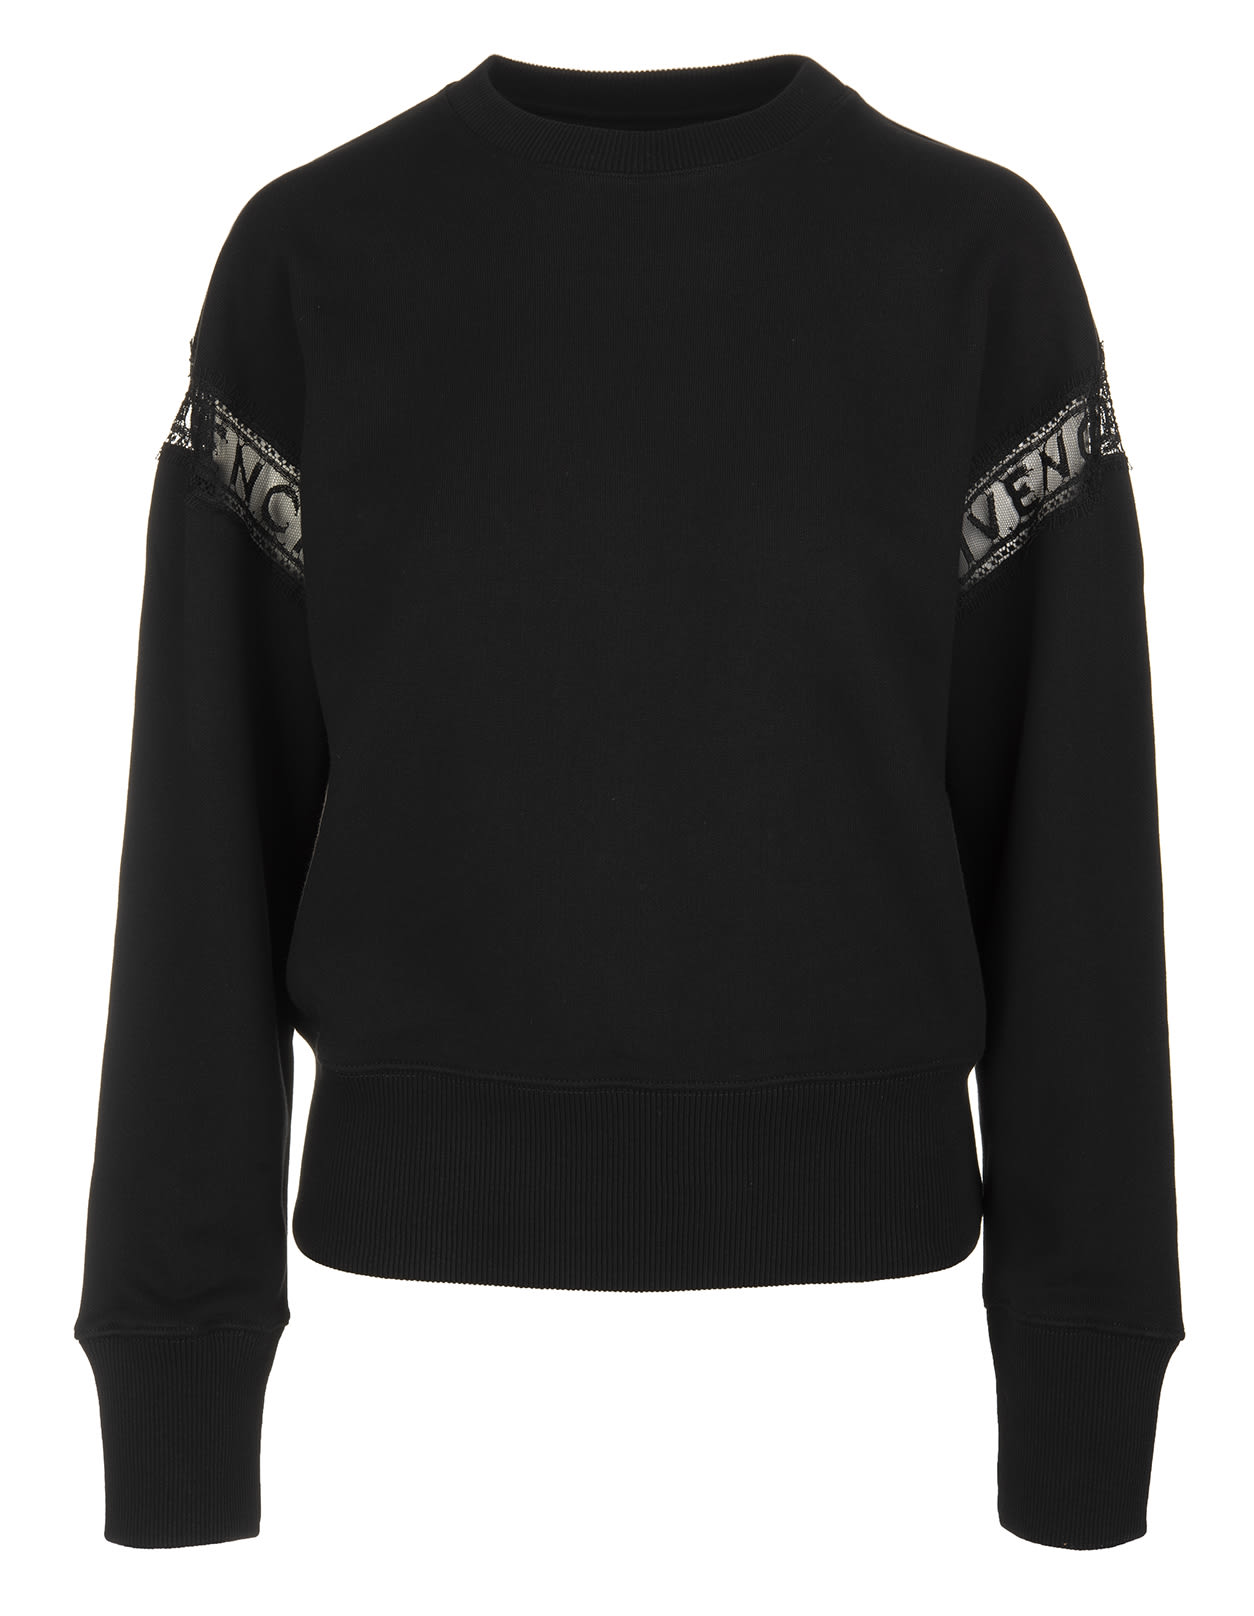 Woman Black Givenchy Sweatshirt With Lace Bands